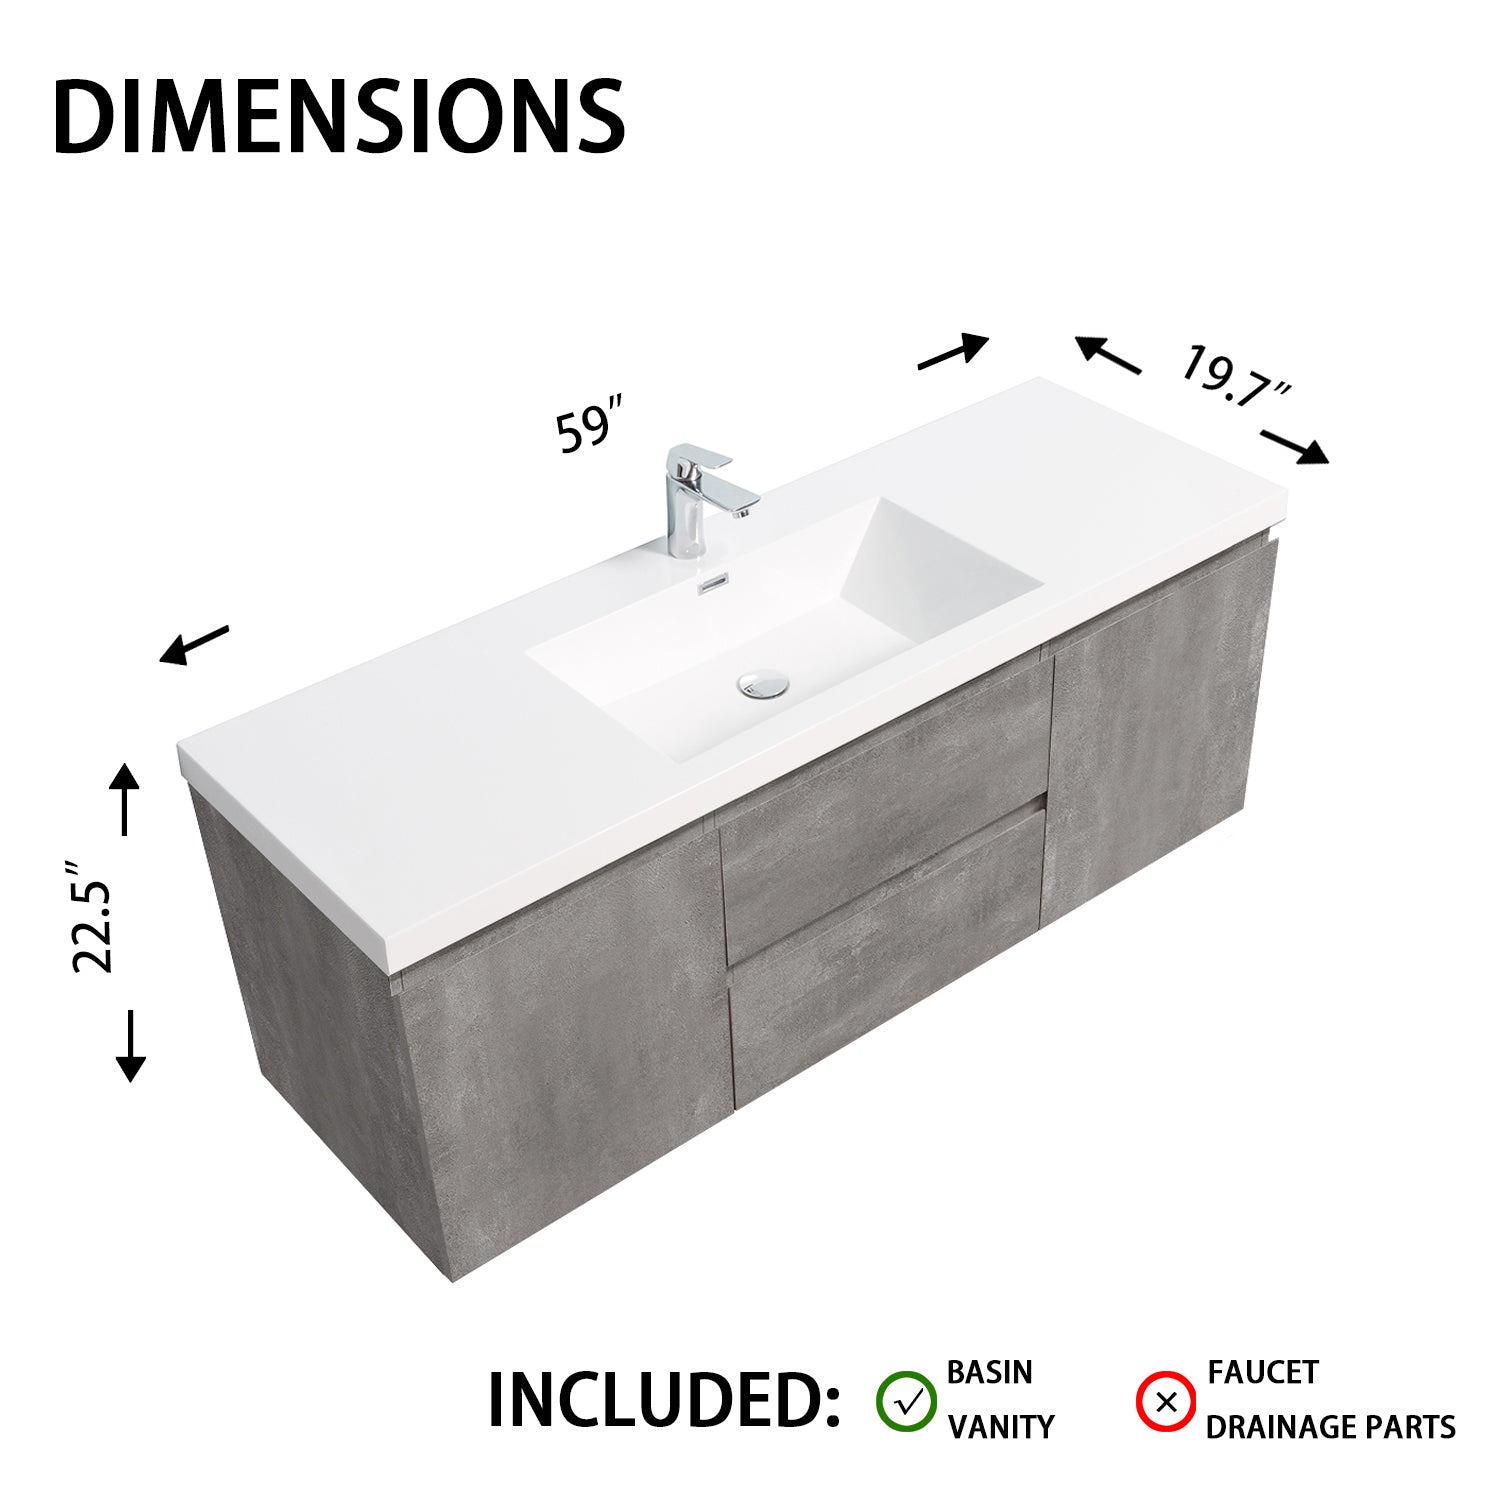 Sinber 60" Wall Mounted Single Rectangular Sink Bathroom Vanity Cabinet with White Acrylic Countertop 2 Doors and 2 Drawers, Compact and Elegant with Sleek Design for Modern Bathrooms